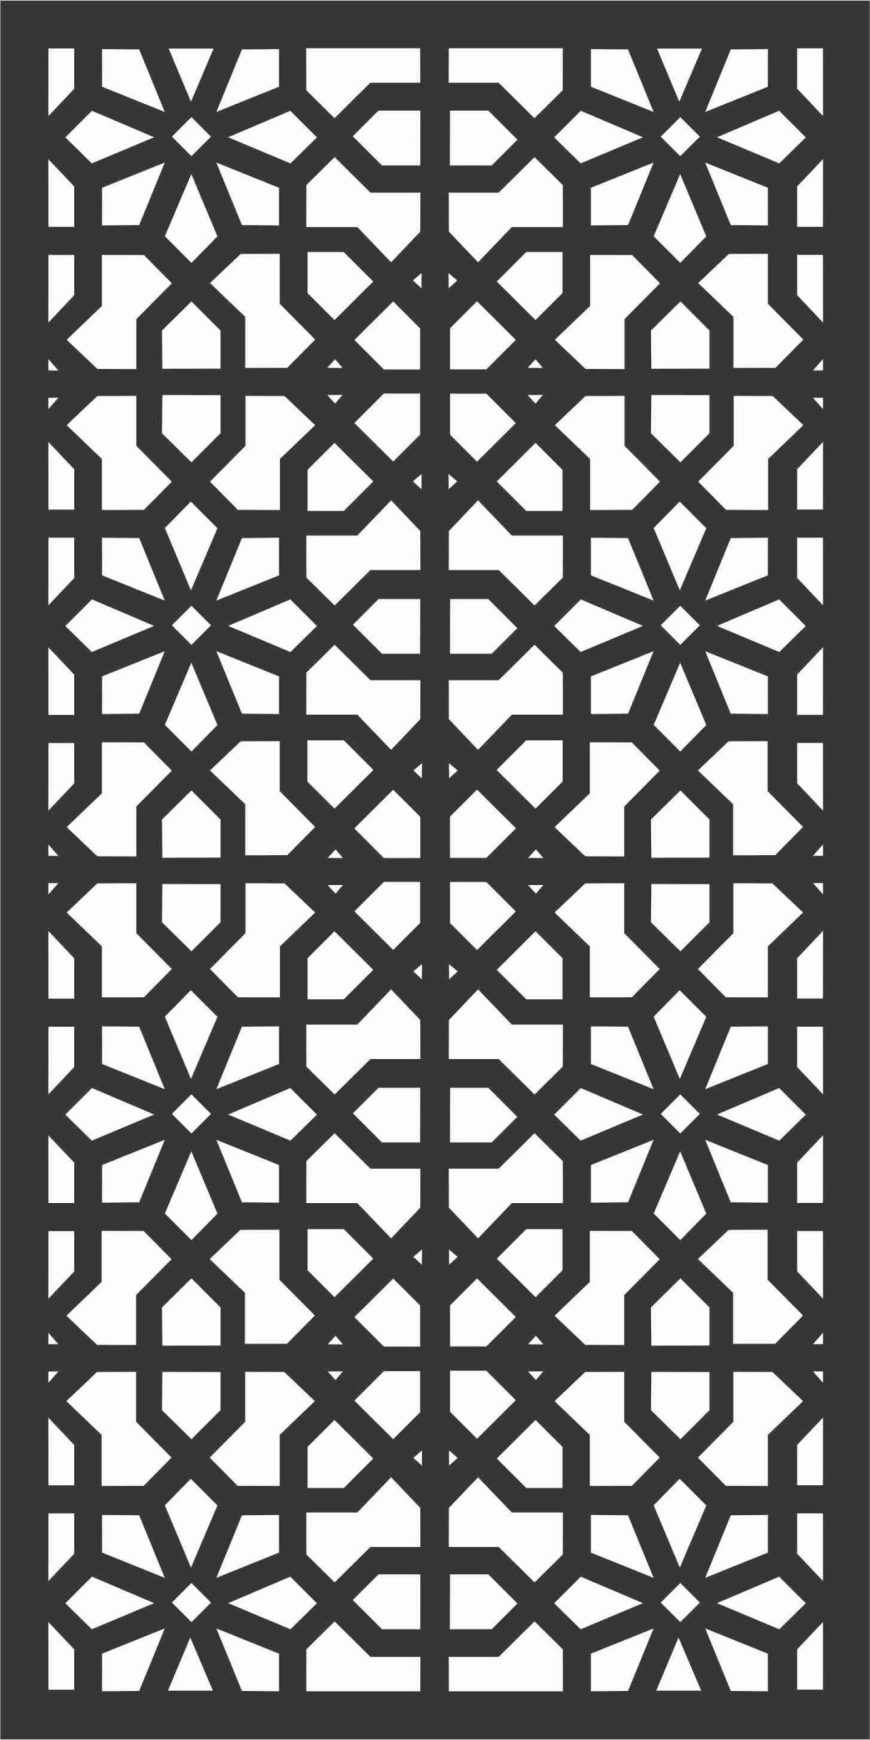 Decorative Screen Patterns For Laser Cutting 179 Free DXF File